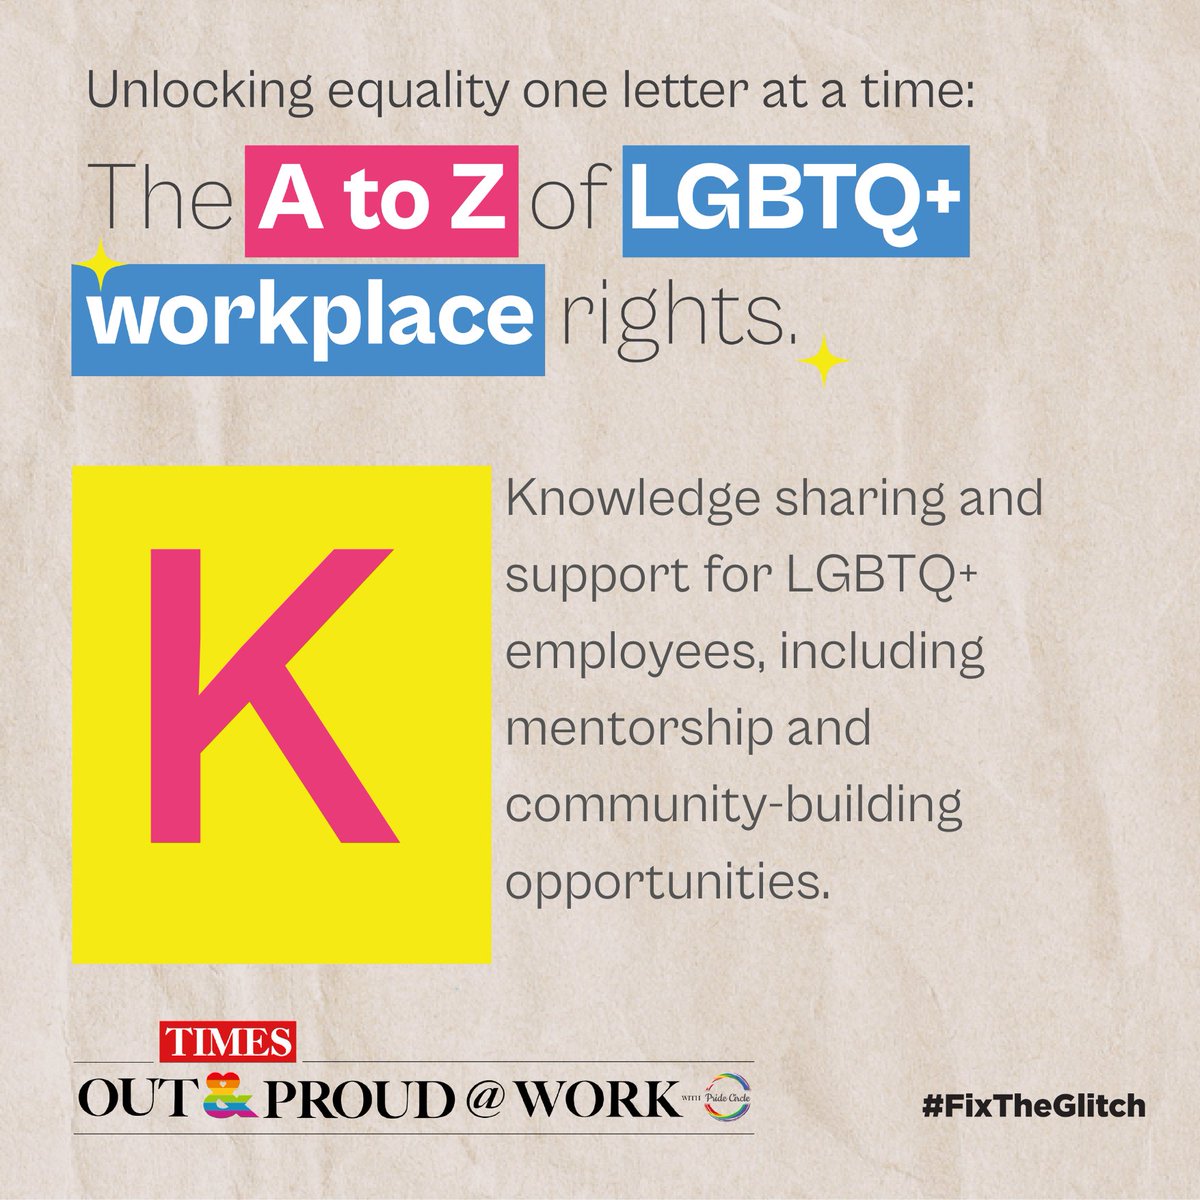 From Allyship to Zero tolerance for discrimination, 'The A to Z of LGBTQIA+ Workplace Rights' empowers us to create a more inclusive workplace for all.  

Take the pledge to #FixTheGlitch: timesoutandproud.com/#take-my-pledge  

#PrideatWork #InclusionMatters